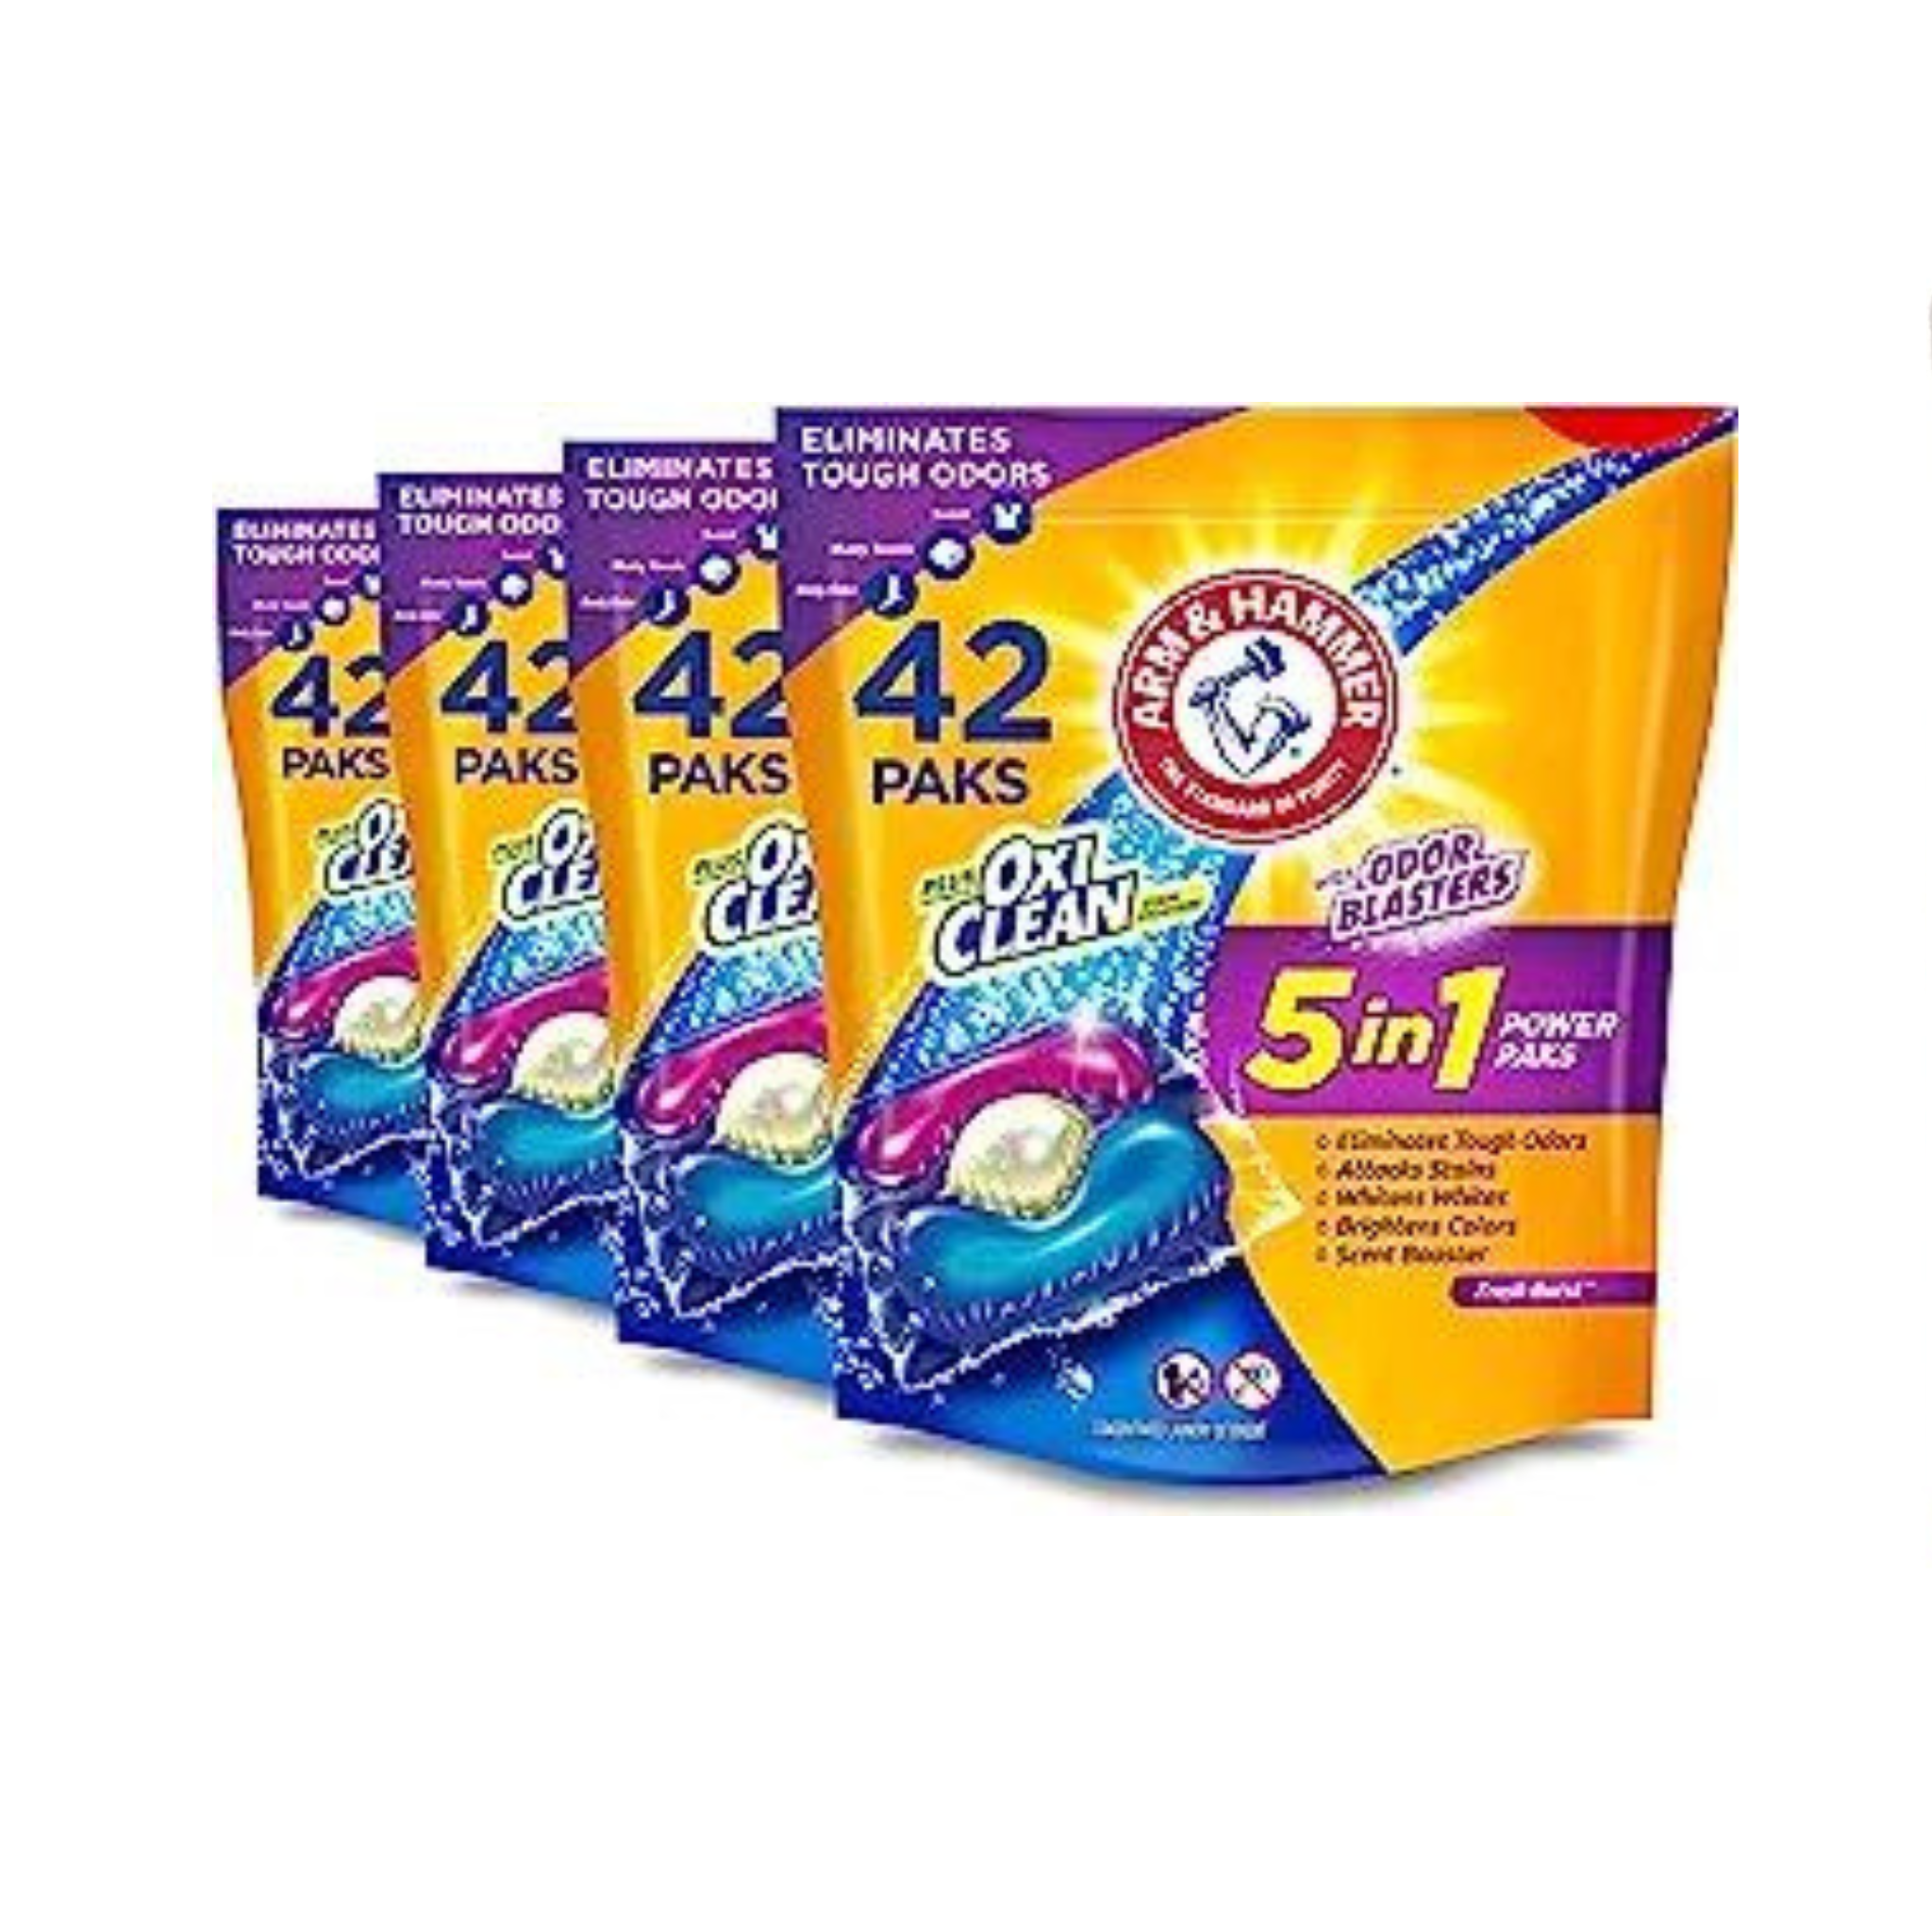 4-Pack 42-Count Arm & Hammer Plus OxiClean w/ Odor Blasters 5-in-1 Laundry Detergent Power Paks